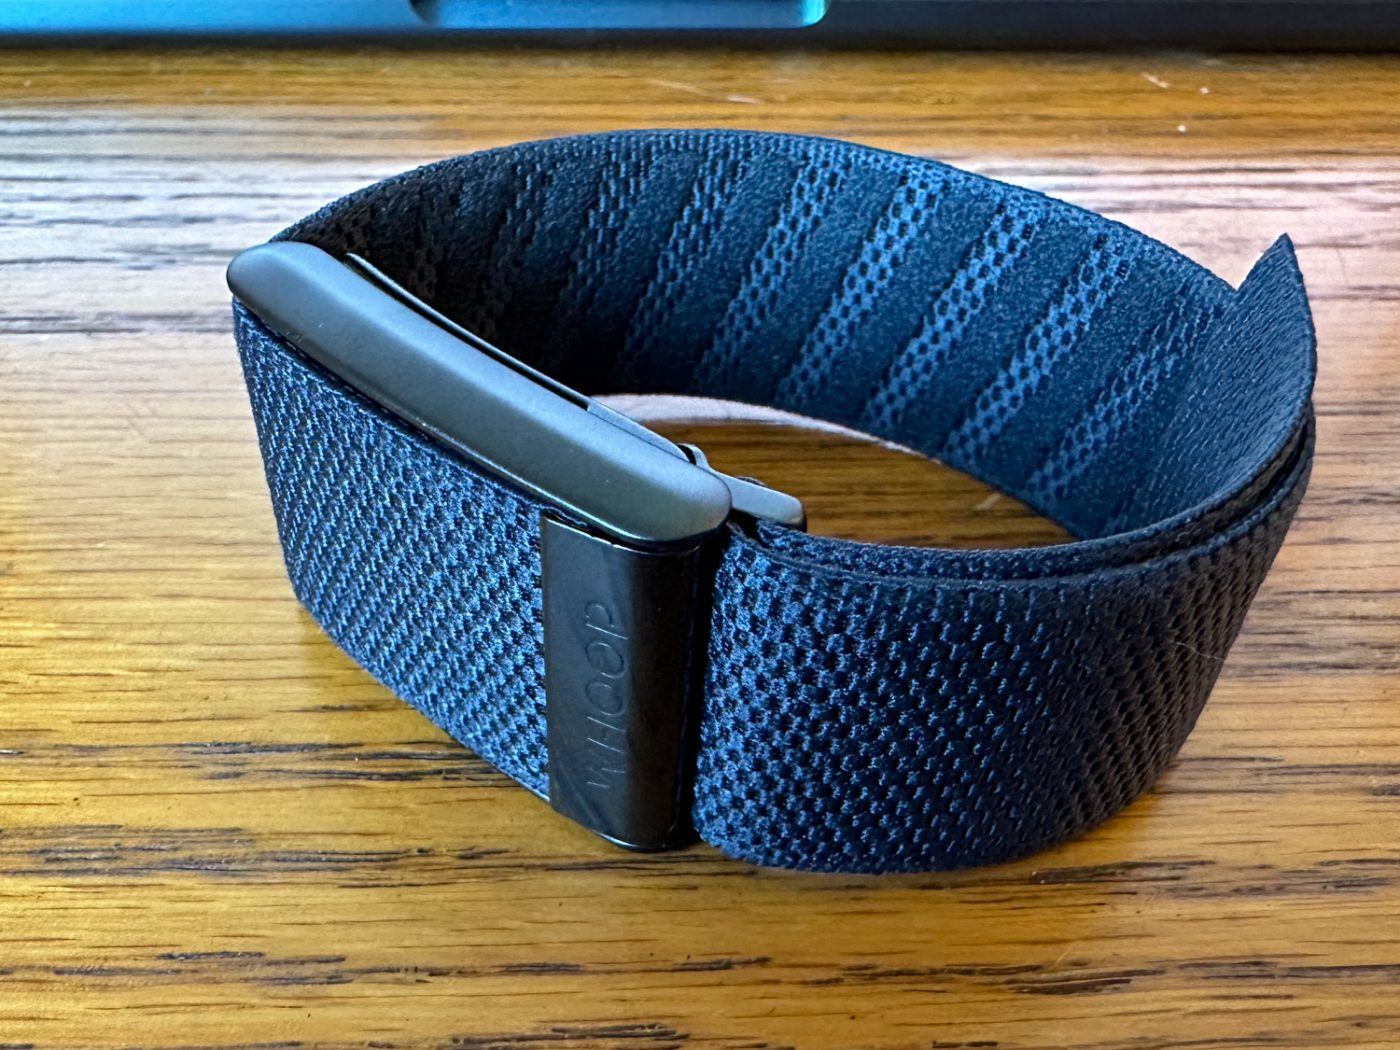 Whoop 4.0 fitness tracker review: Helpful analysis at a high price